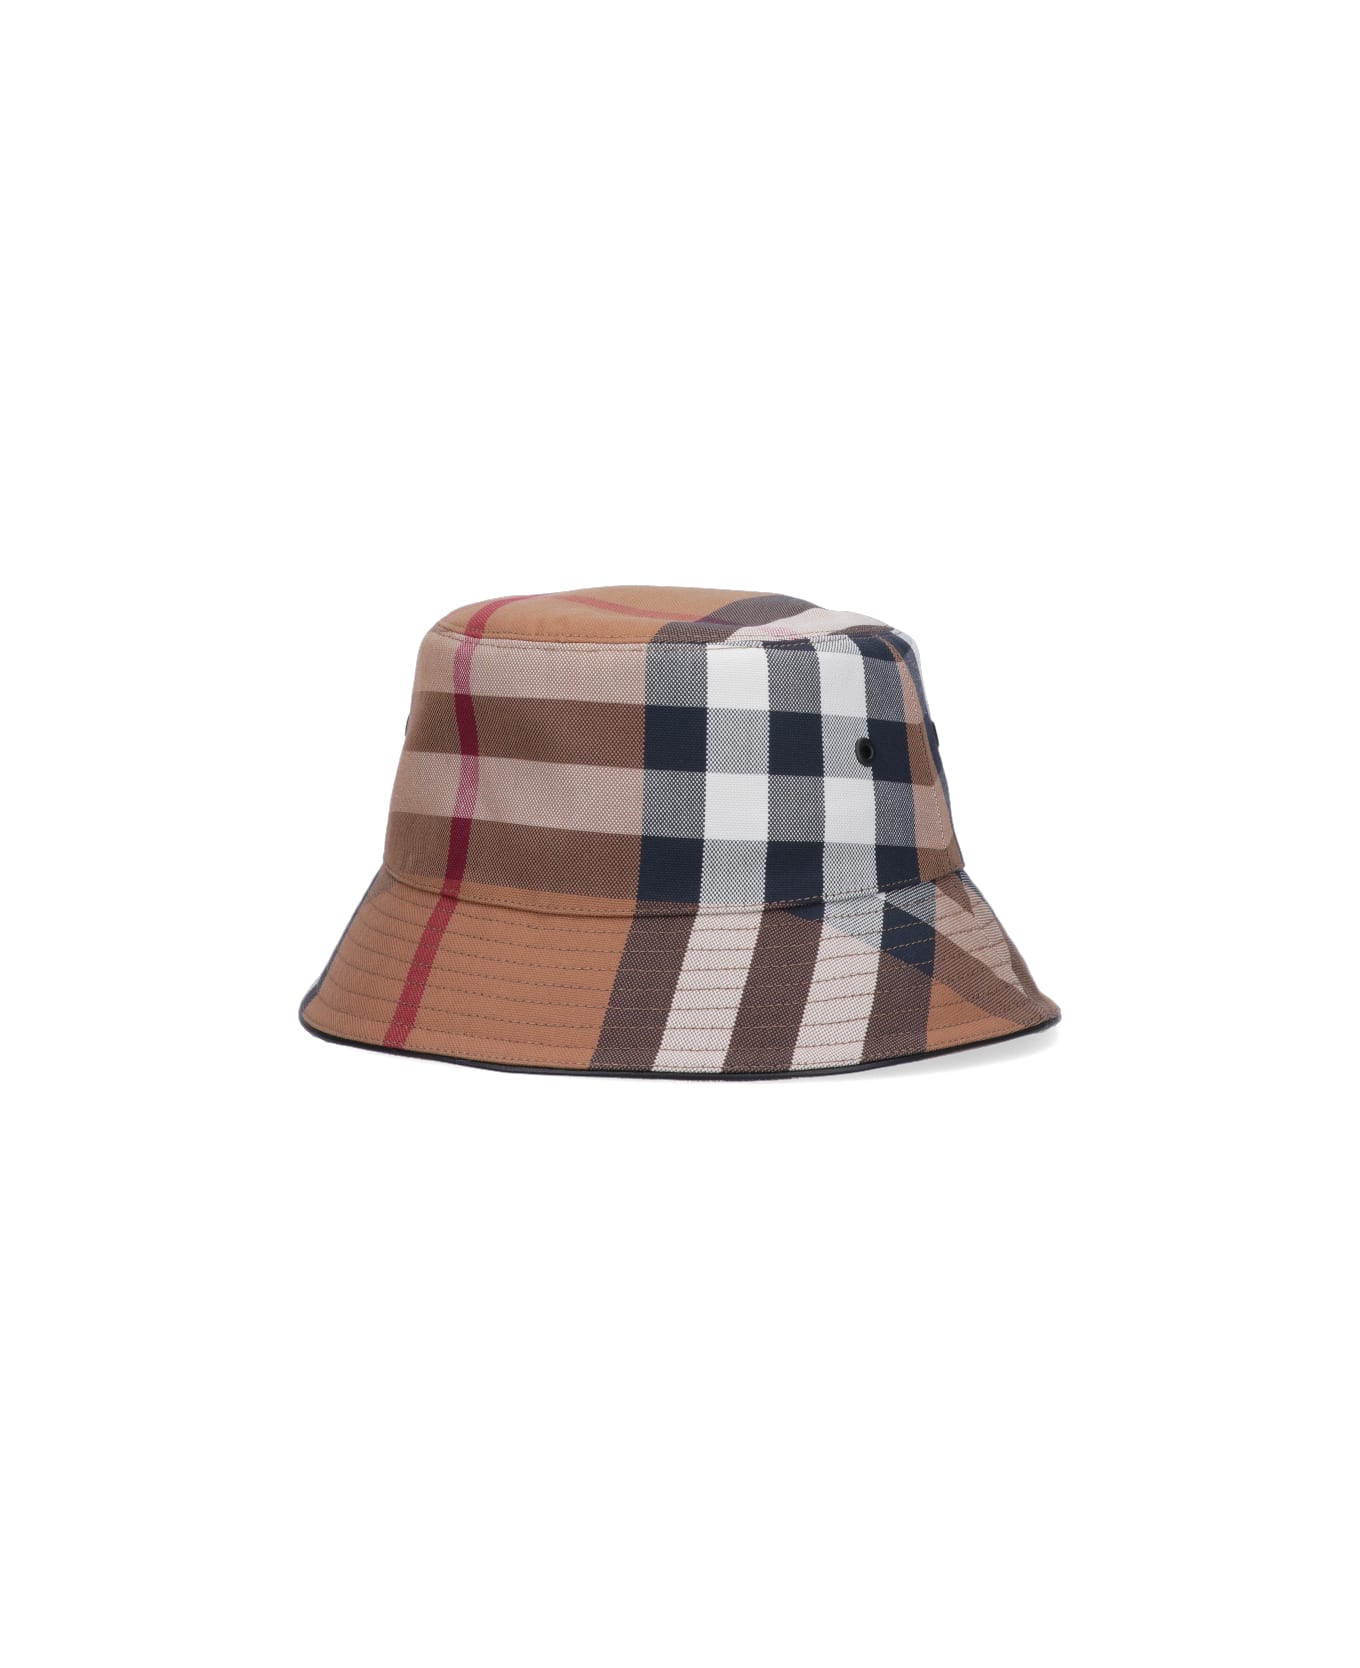 Burberry Hat - Brown